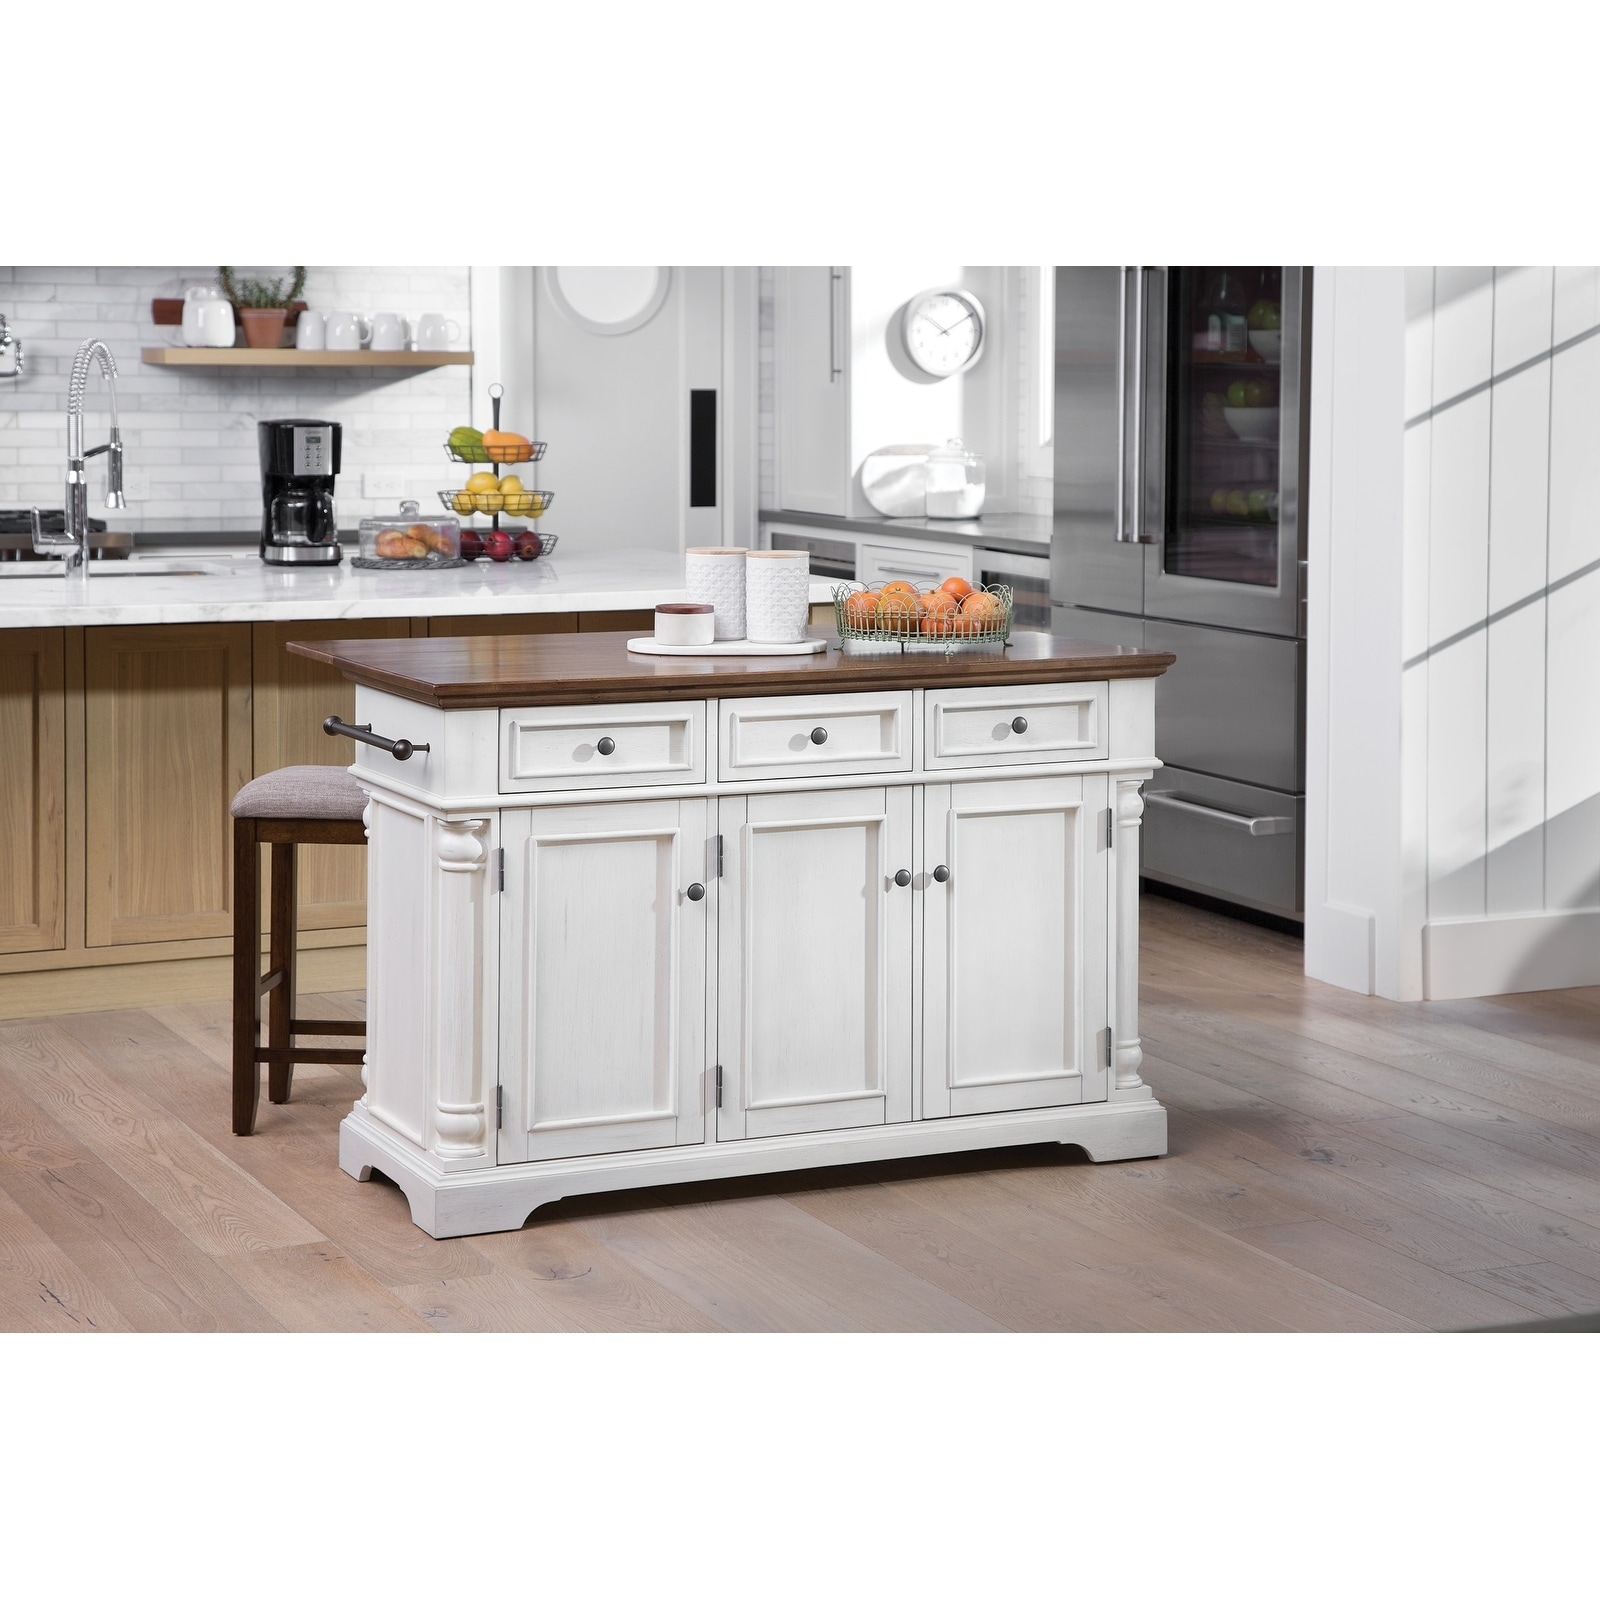 How Much Room Do You Need For A Kitchen Island F W S Countertops